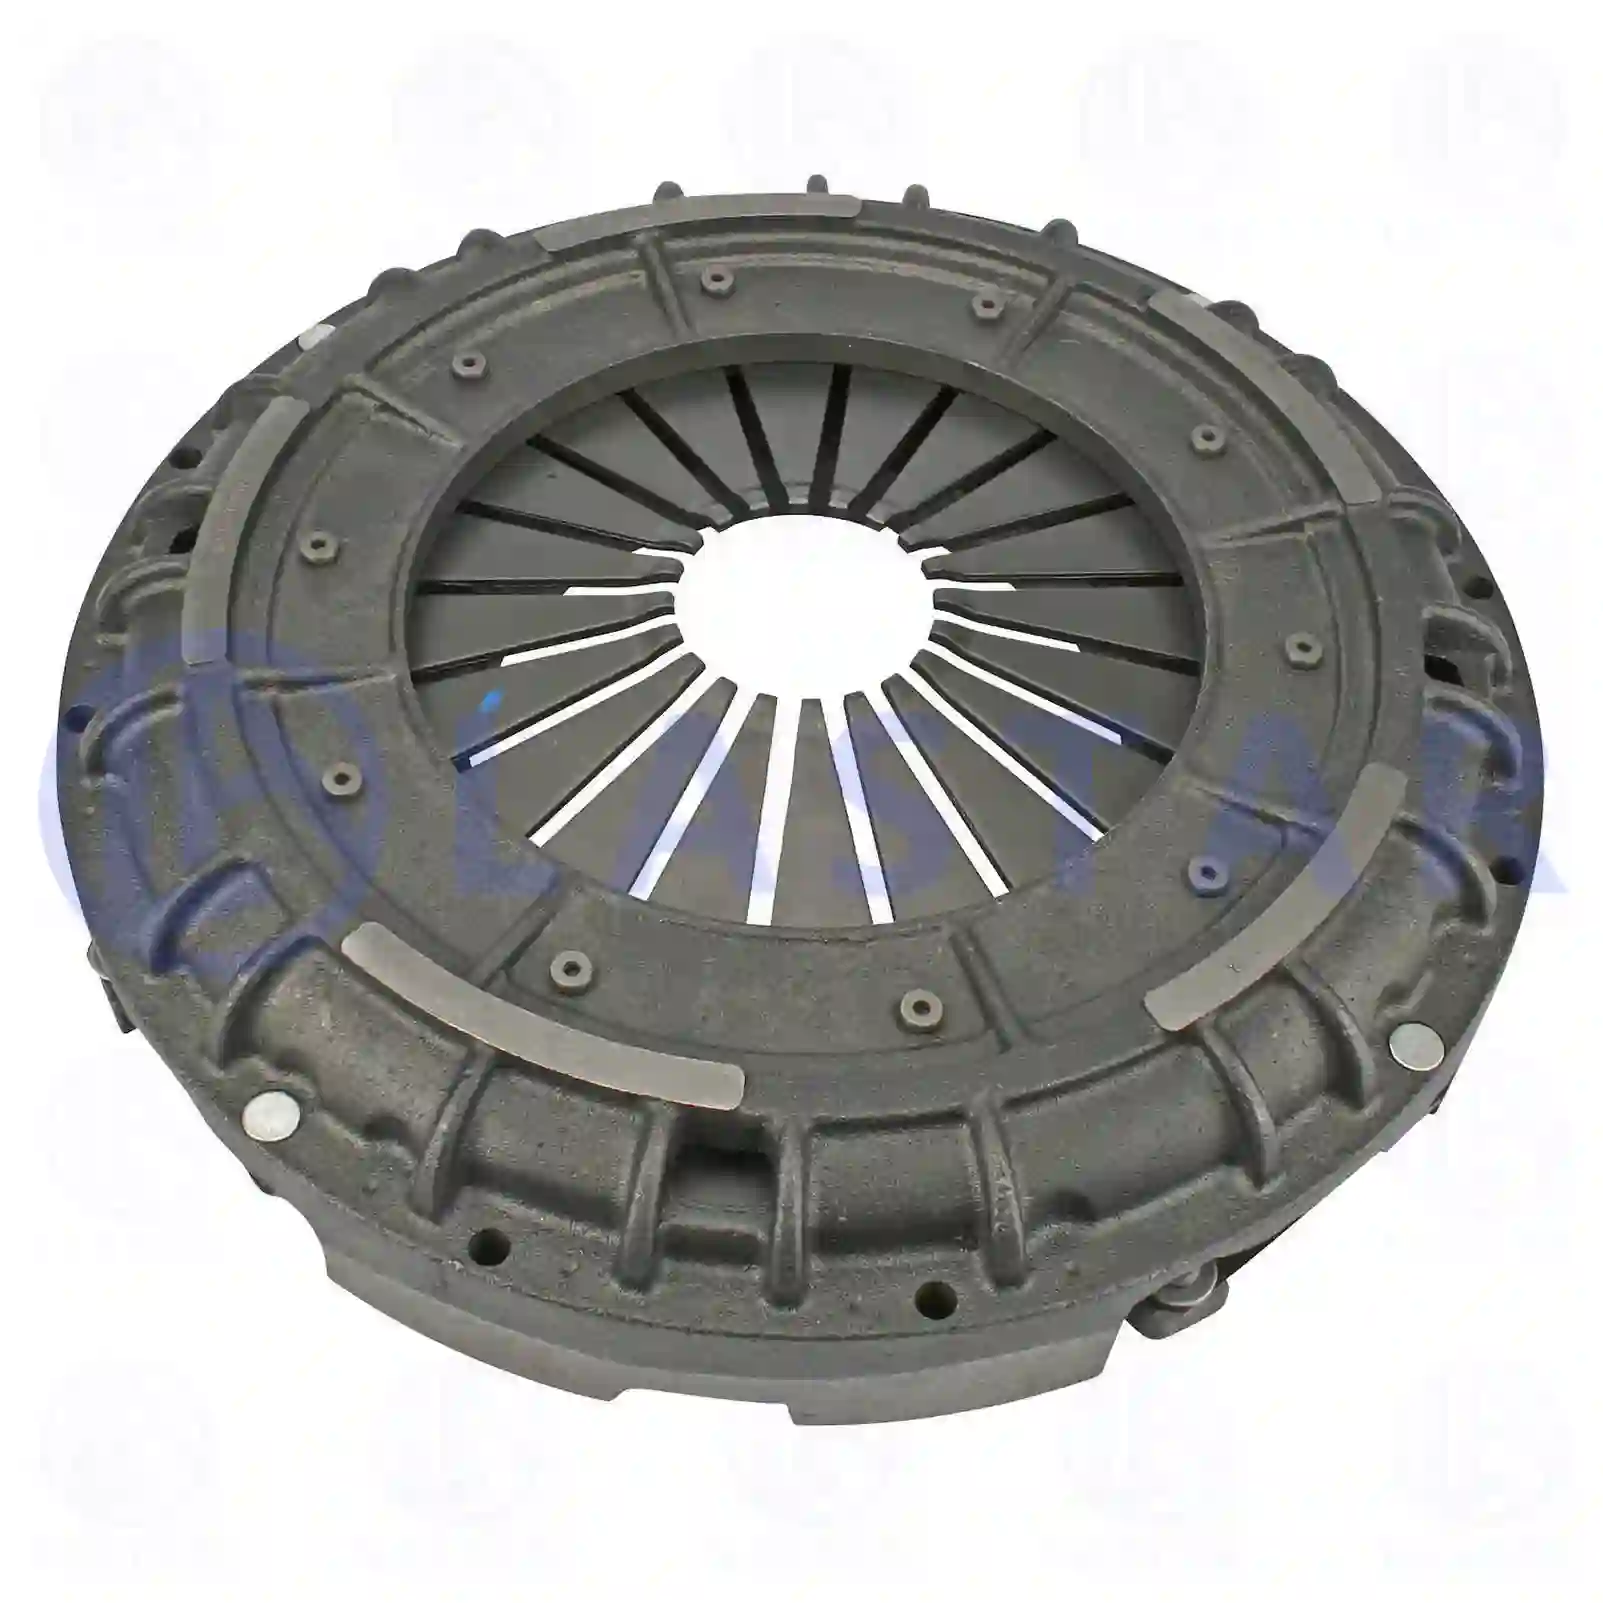 Clutch cover, 77721856, 20223808, 040110900, 1102425, 234682, 264786, 294884, 306600, 327557, 329439, 1074439, 1102425, 113012, 234682, 264786, 294884, 306600, 327557, 329439, 524466 ||  77721856 Lastar Spare Part | Truck Spare Parts, Auotomotive Spare Parts Clutch cover, 77721856, 20223808, 040110900, 1102425, 234682, 264786, 294884, 306600, 327557, 329439, 1074439, 1102425, 113012, 234682, 264786, 294884, 306600, 327557, 329439, 524466 ||  77721856 Lastar Spare Part | Truck Spare Parts, Auotomotive Spare Parts